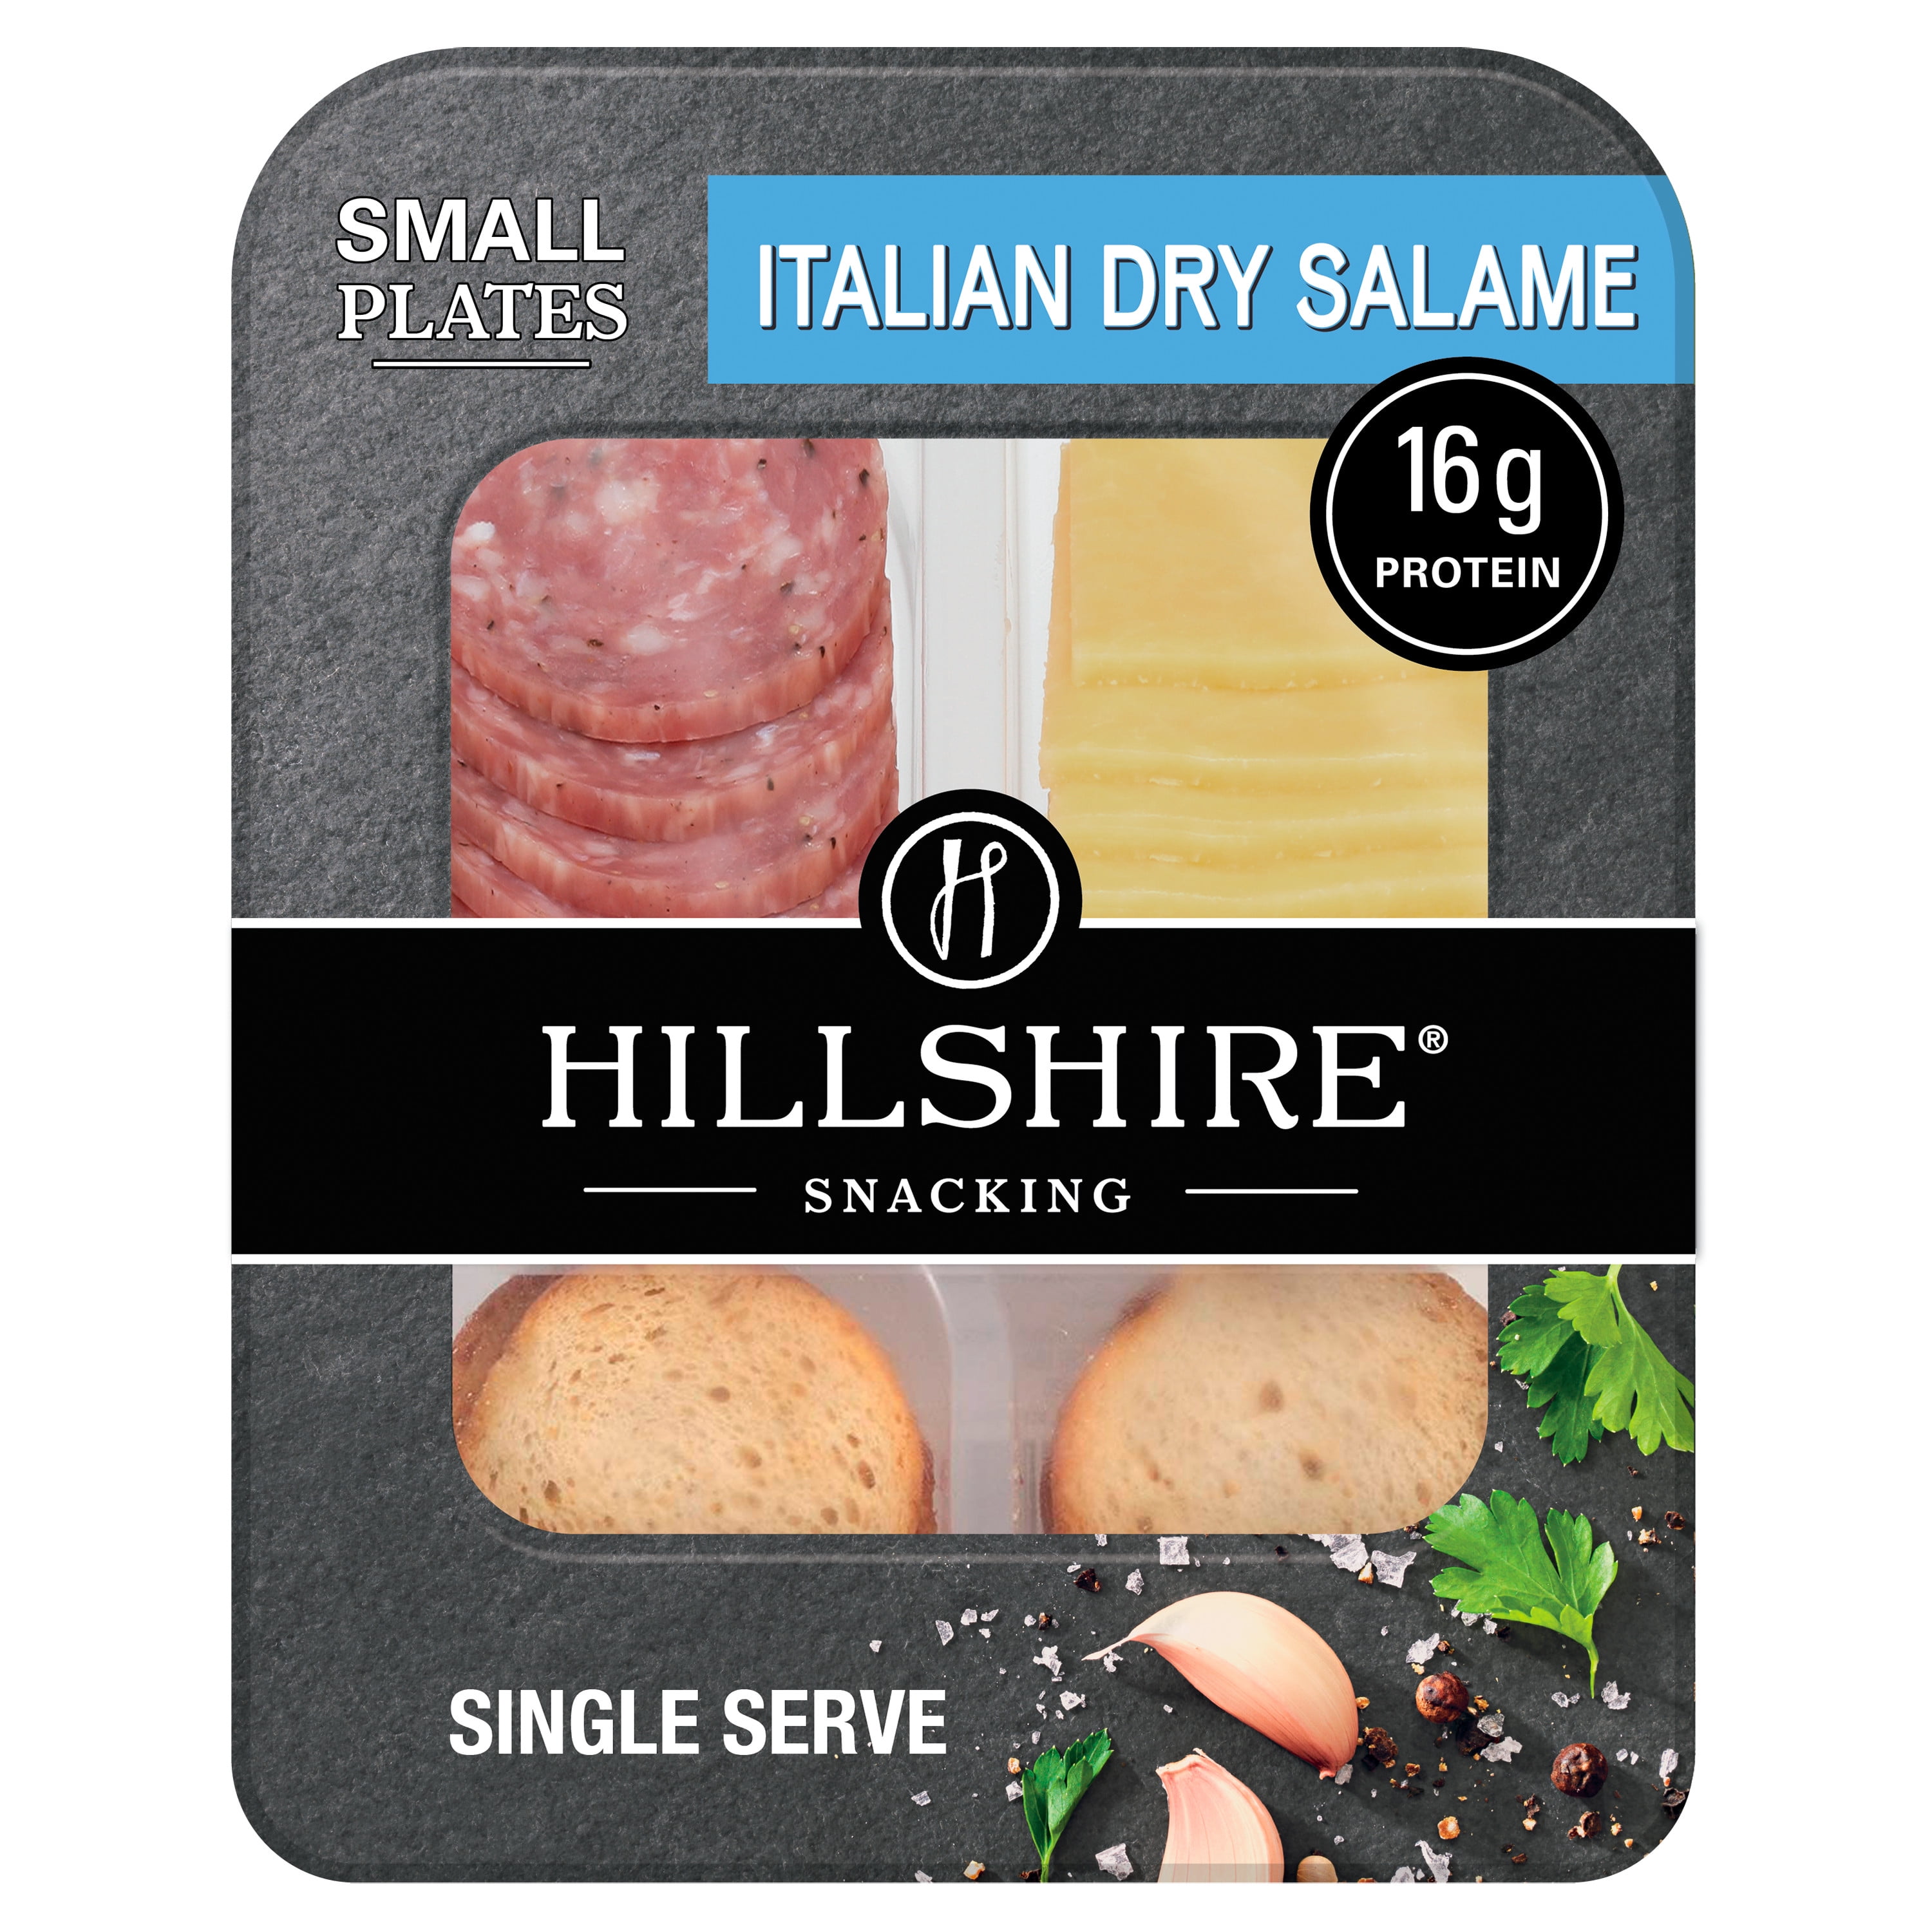 Hillshire Snacking Italian Dry Salami and Gouda Cheese Snack Kit, 2.8 oz, 1 Count